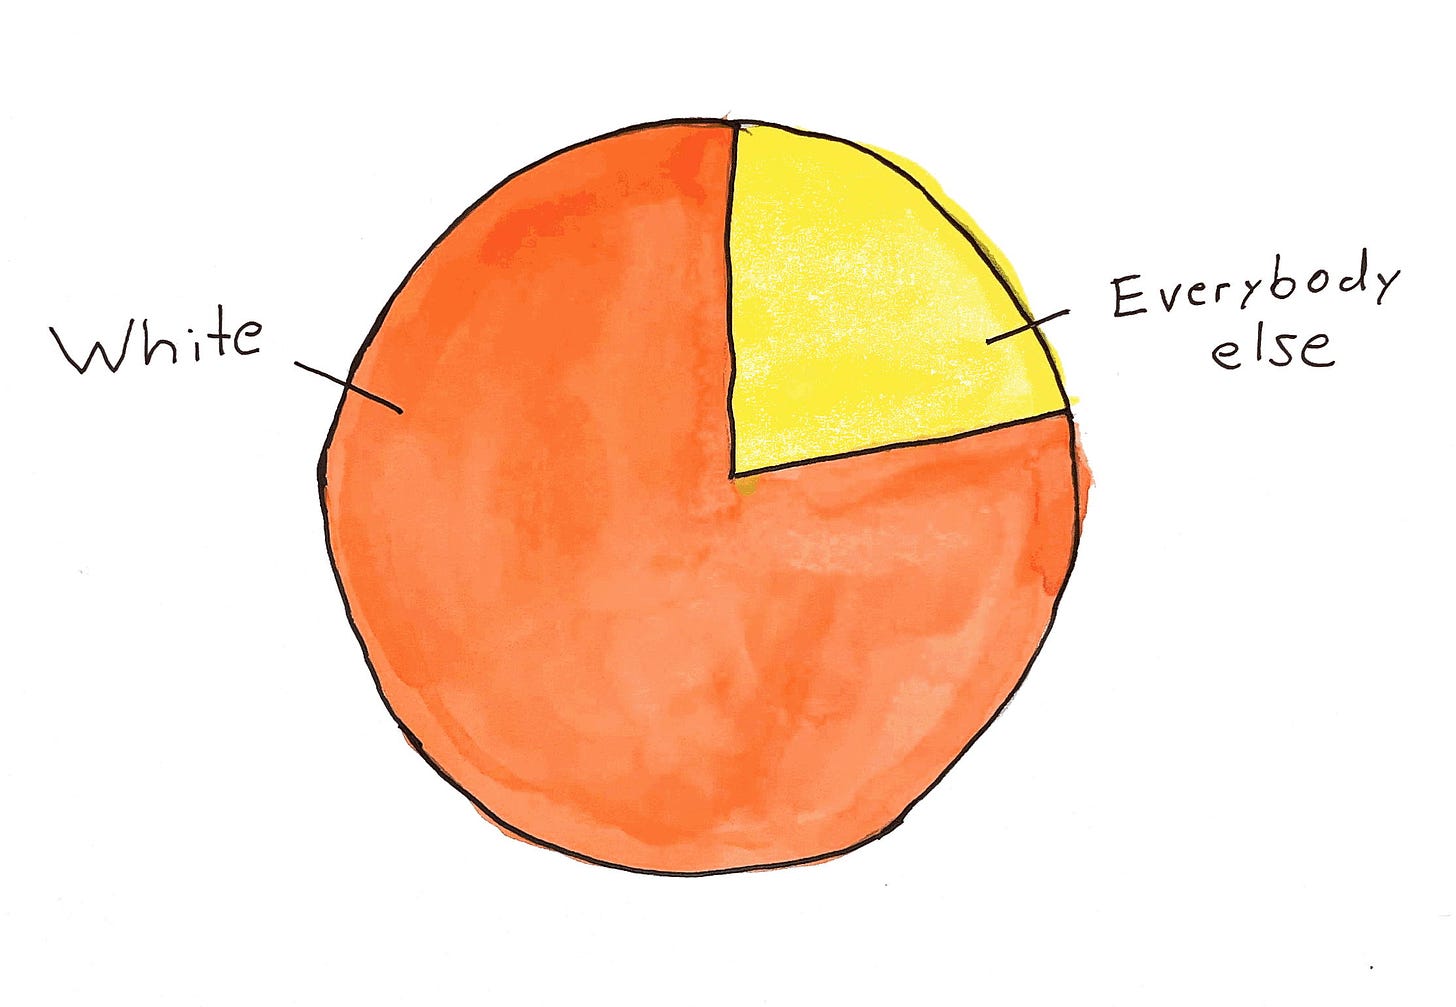 Pie chart showing 80 percent labeled White and the other 20 percent labeled Everybody else